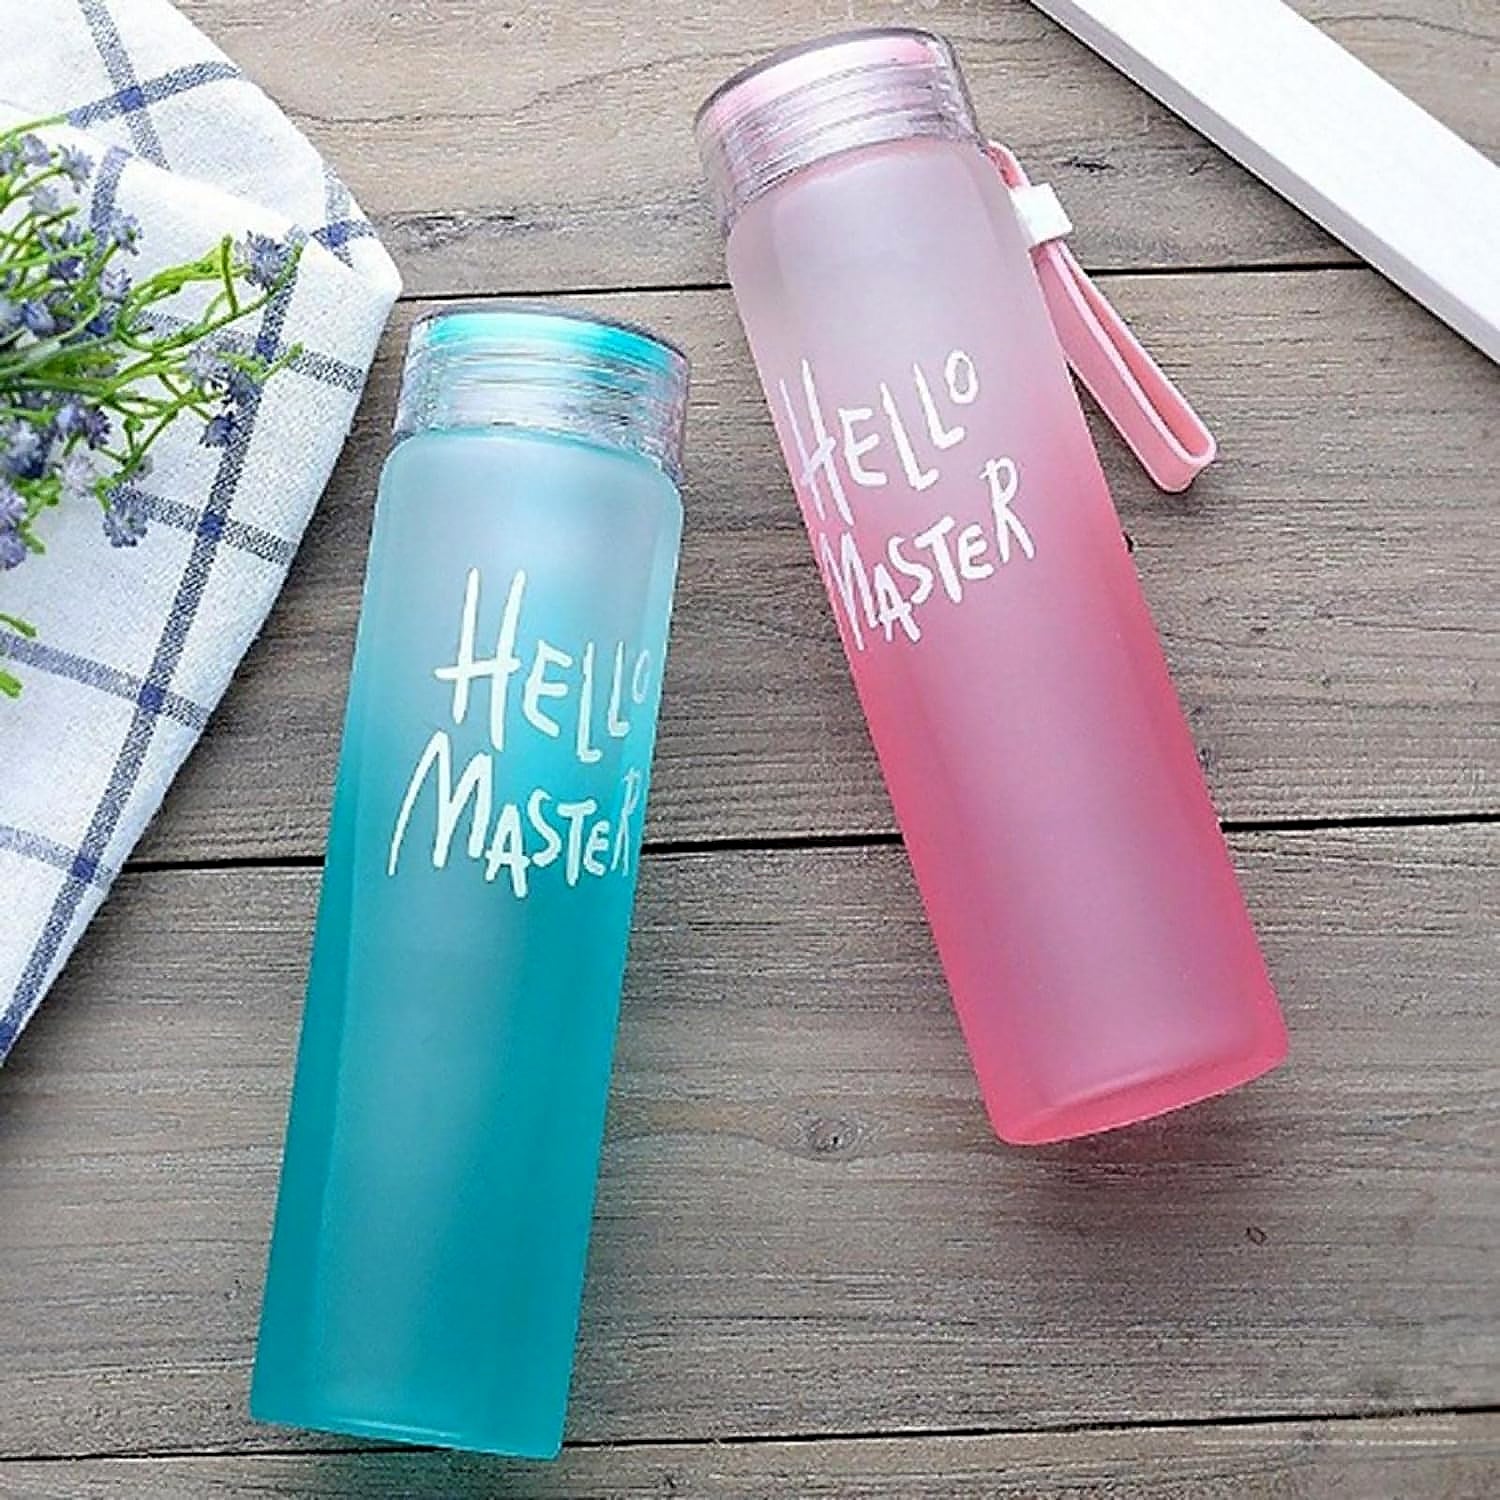 Motivational Glass Water Bottle Colorful potable Water Glass Bottle With Rubber Band, Daily Intake Hourly Water Bottle to Ensure You Drink Enough Water Throughout The Day Reusable Cycling Gym, Workout Fitness Bottle